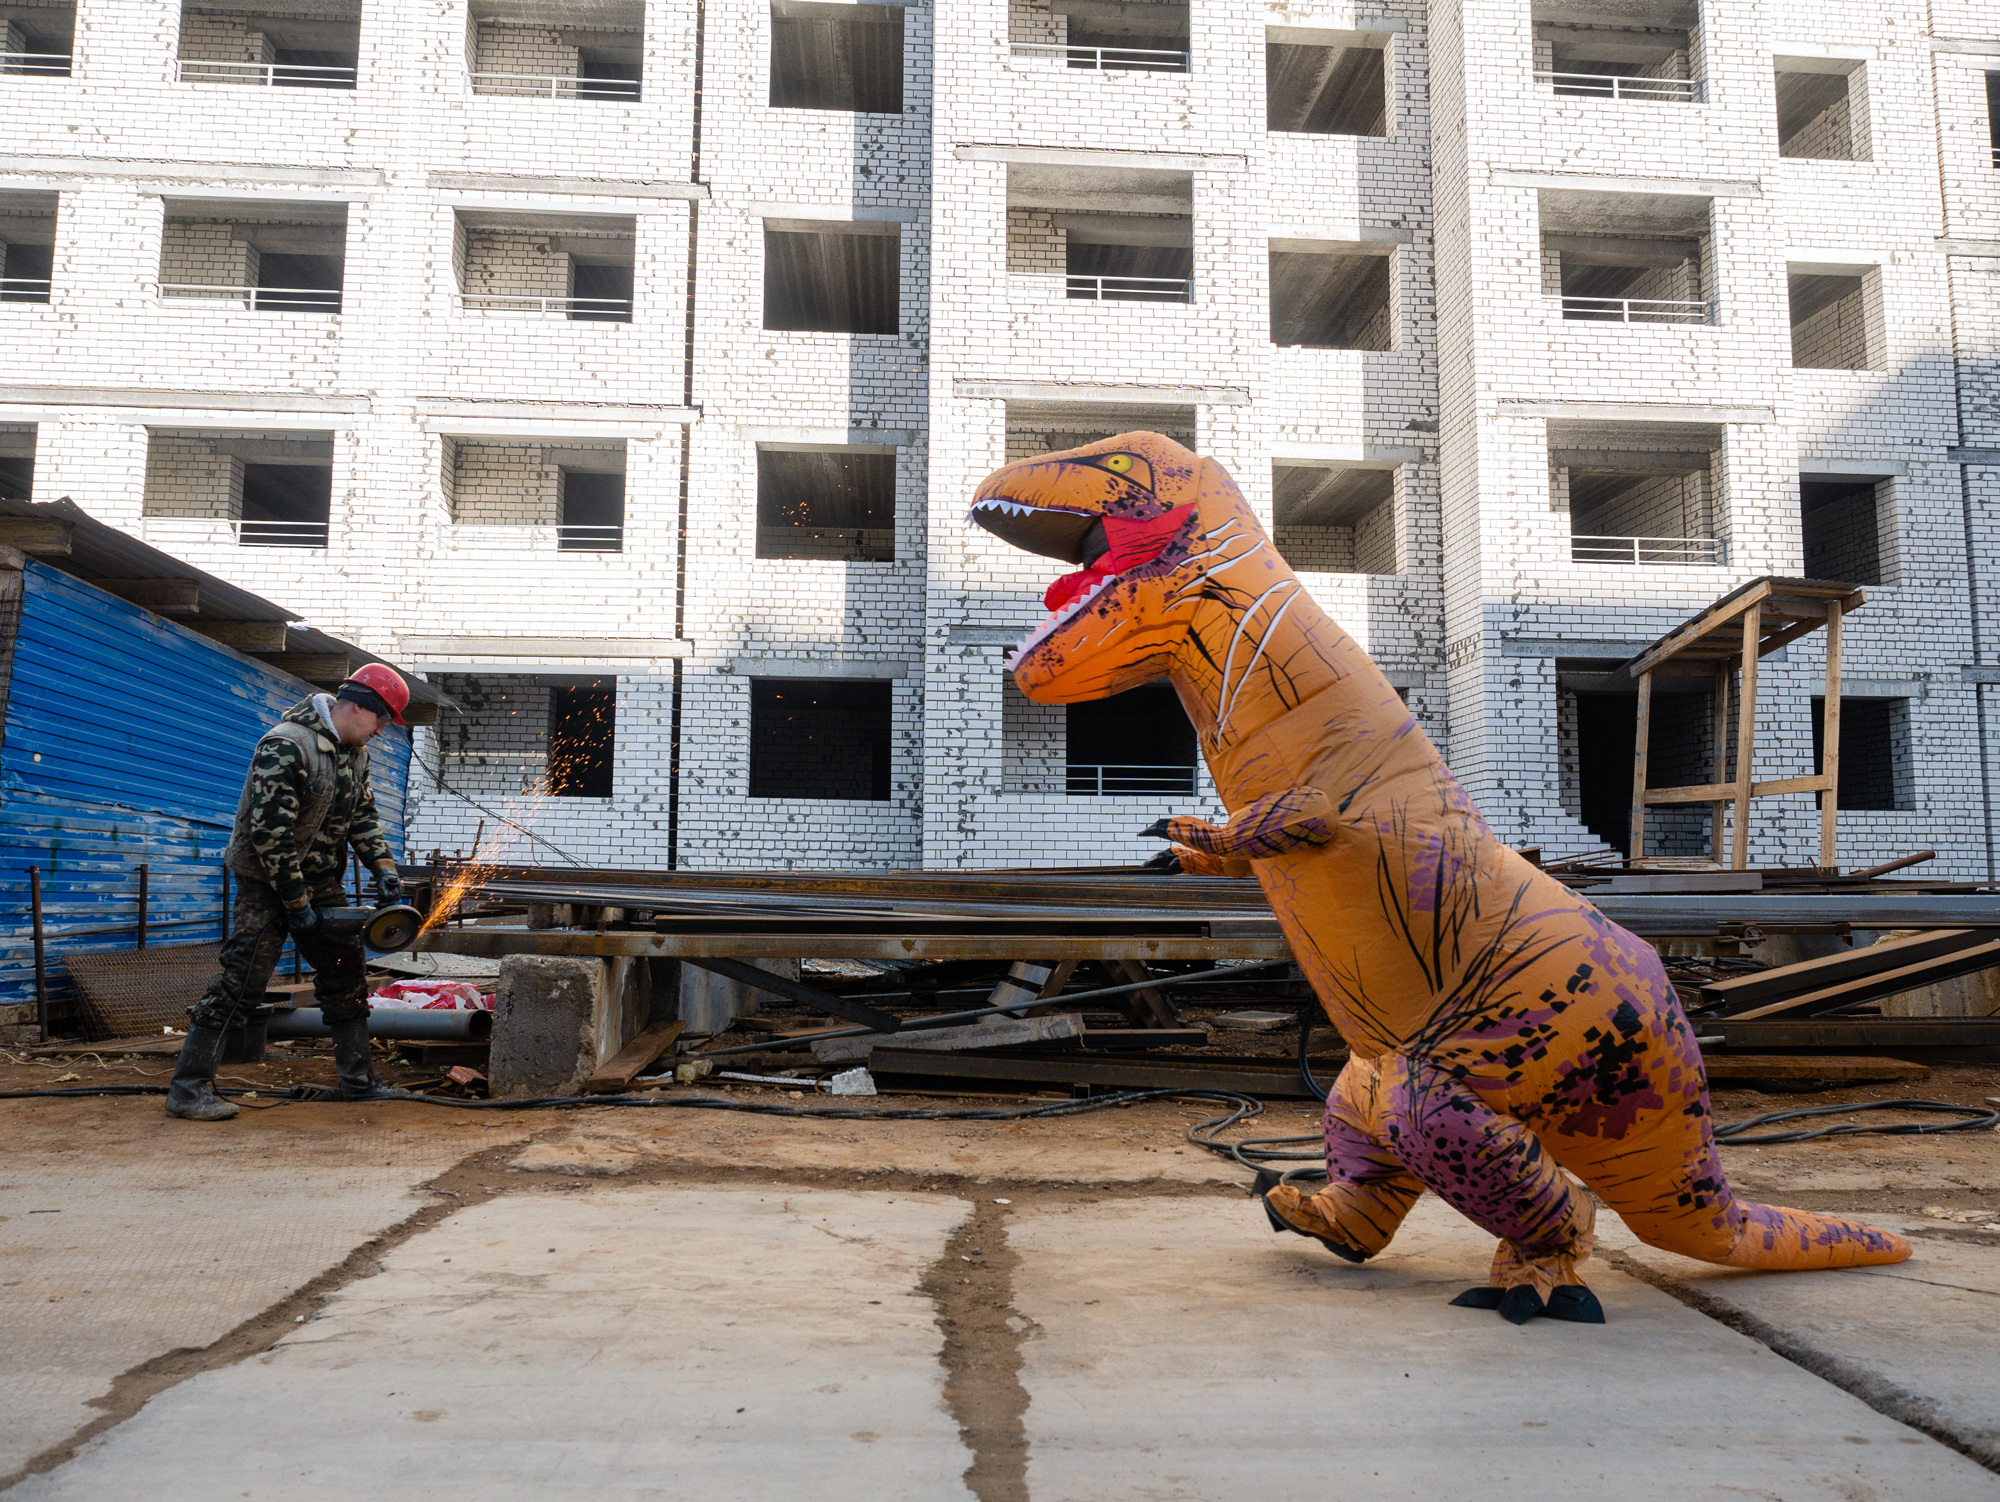 In Nizhny Novgorod, on April 1, one of the developers published an extremely unusual photo report on the progress of construction - Dinosaur costume, Building, Developer, April 1, Longpost, Nizhny Novgorod